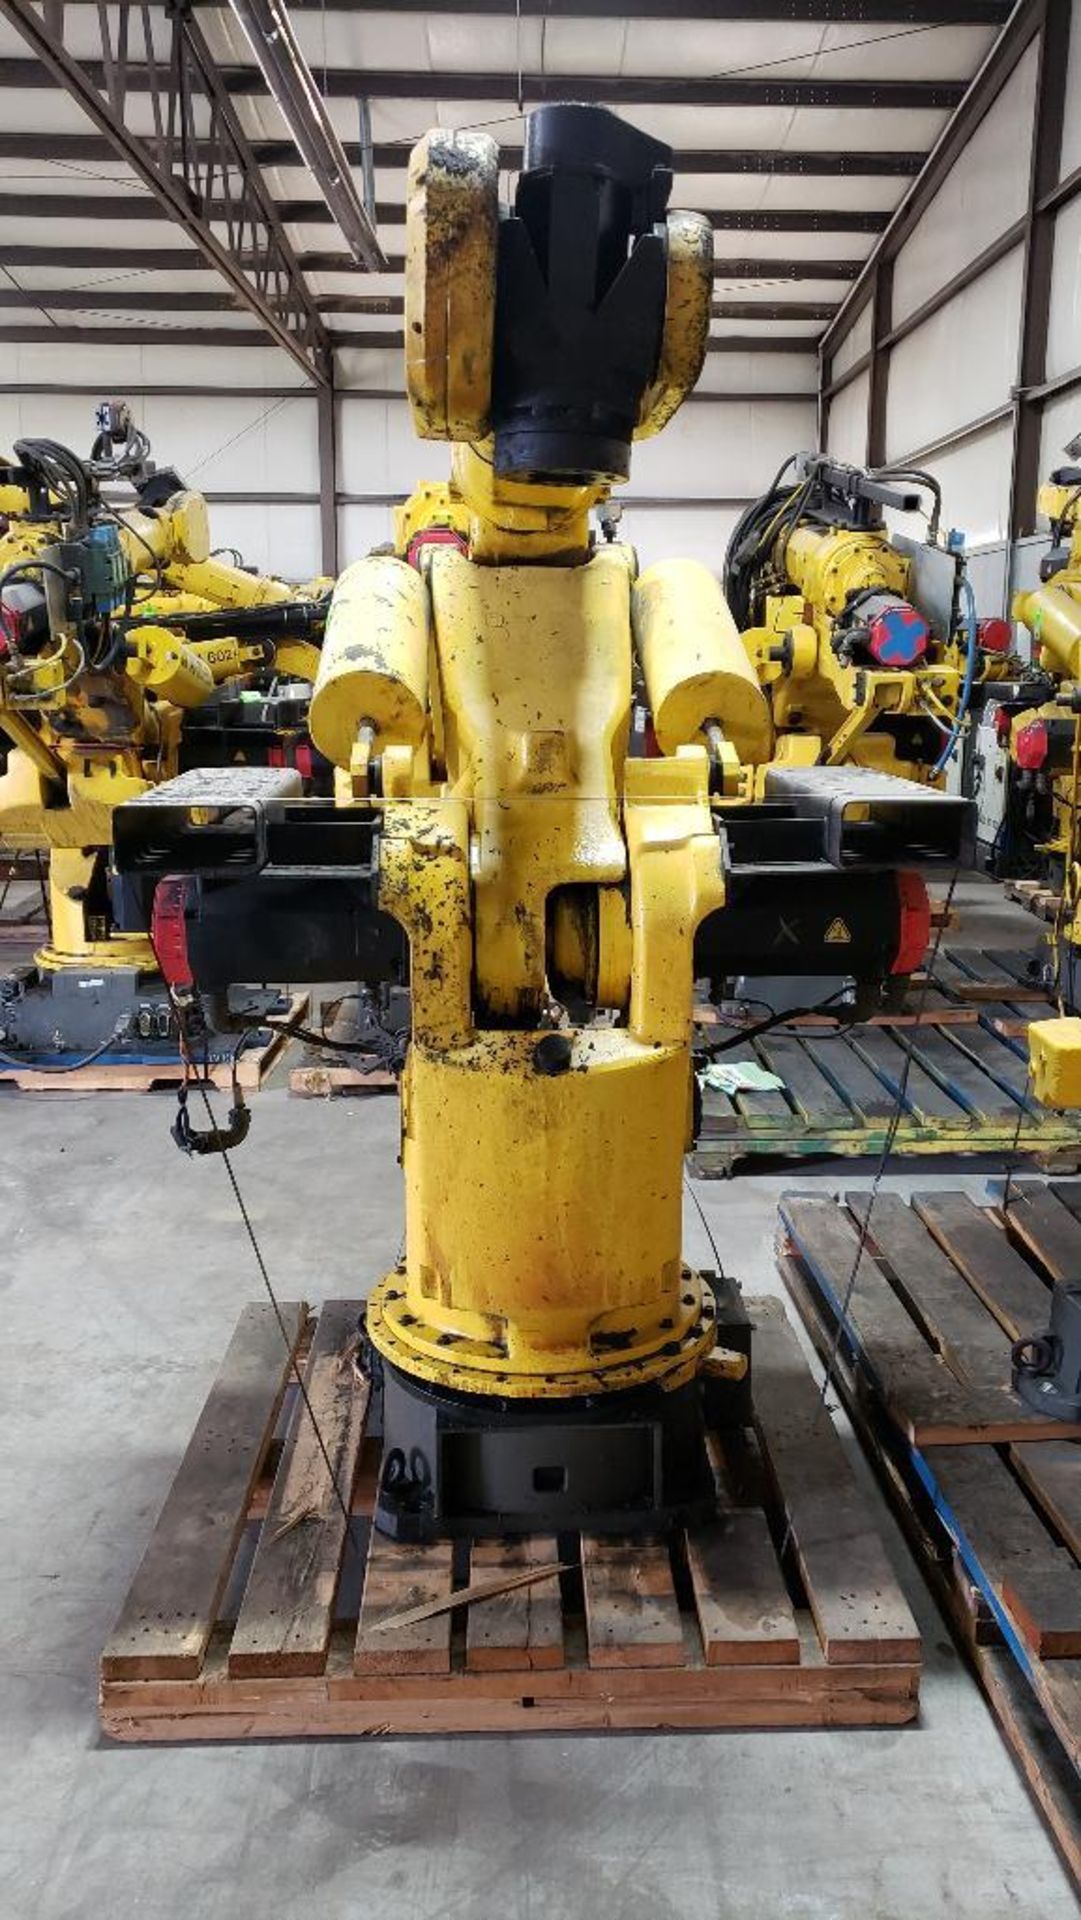 (Parts/Repairable) Fanuc S-420iW robot 6-axis arm. - Image 5 of 8